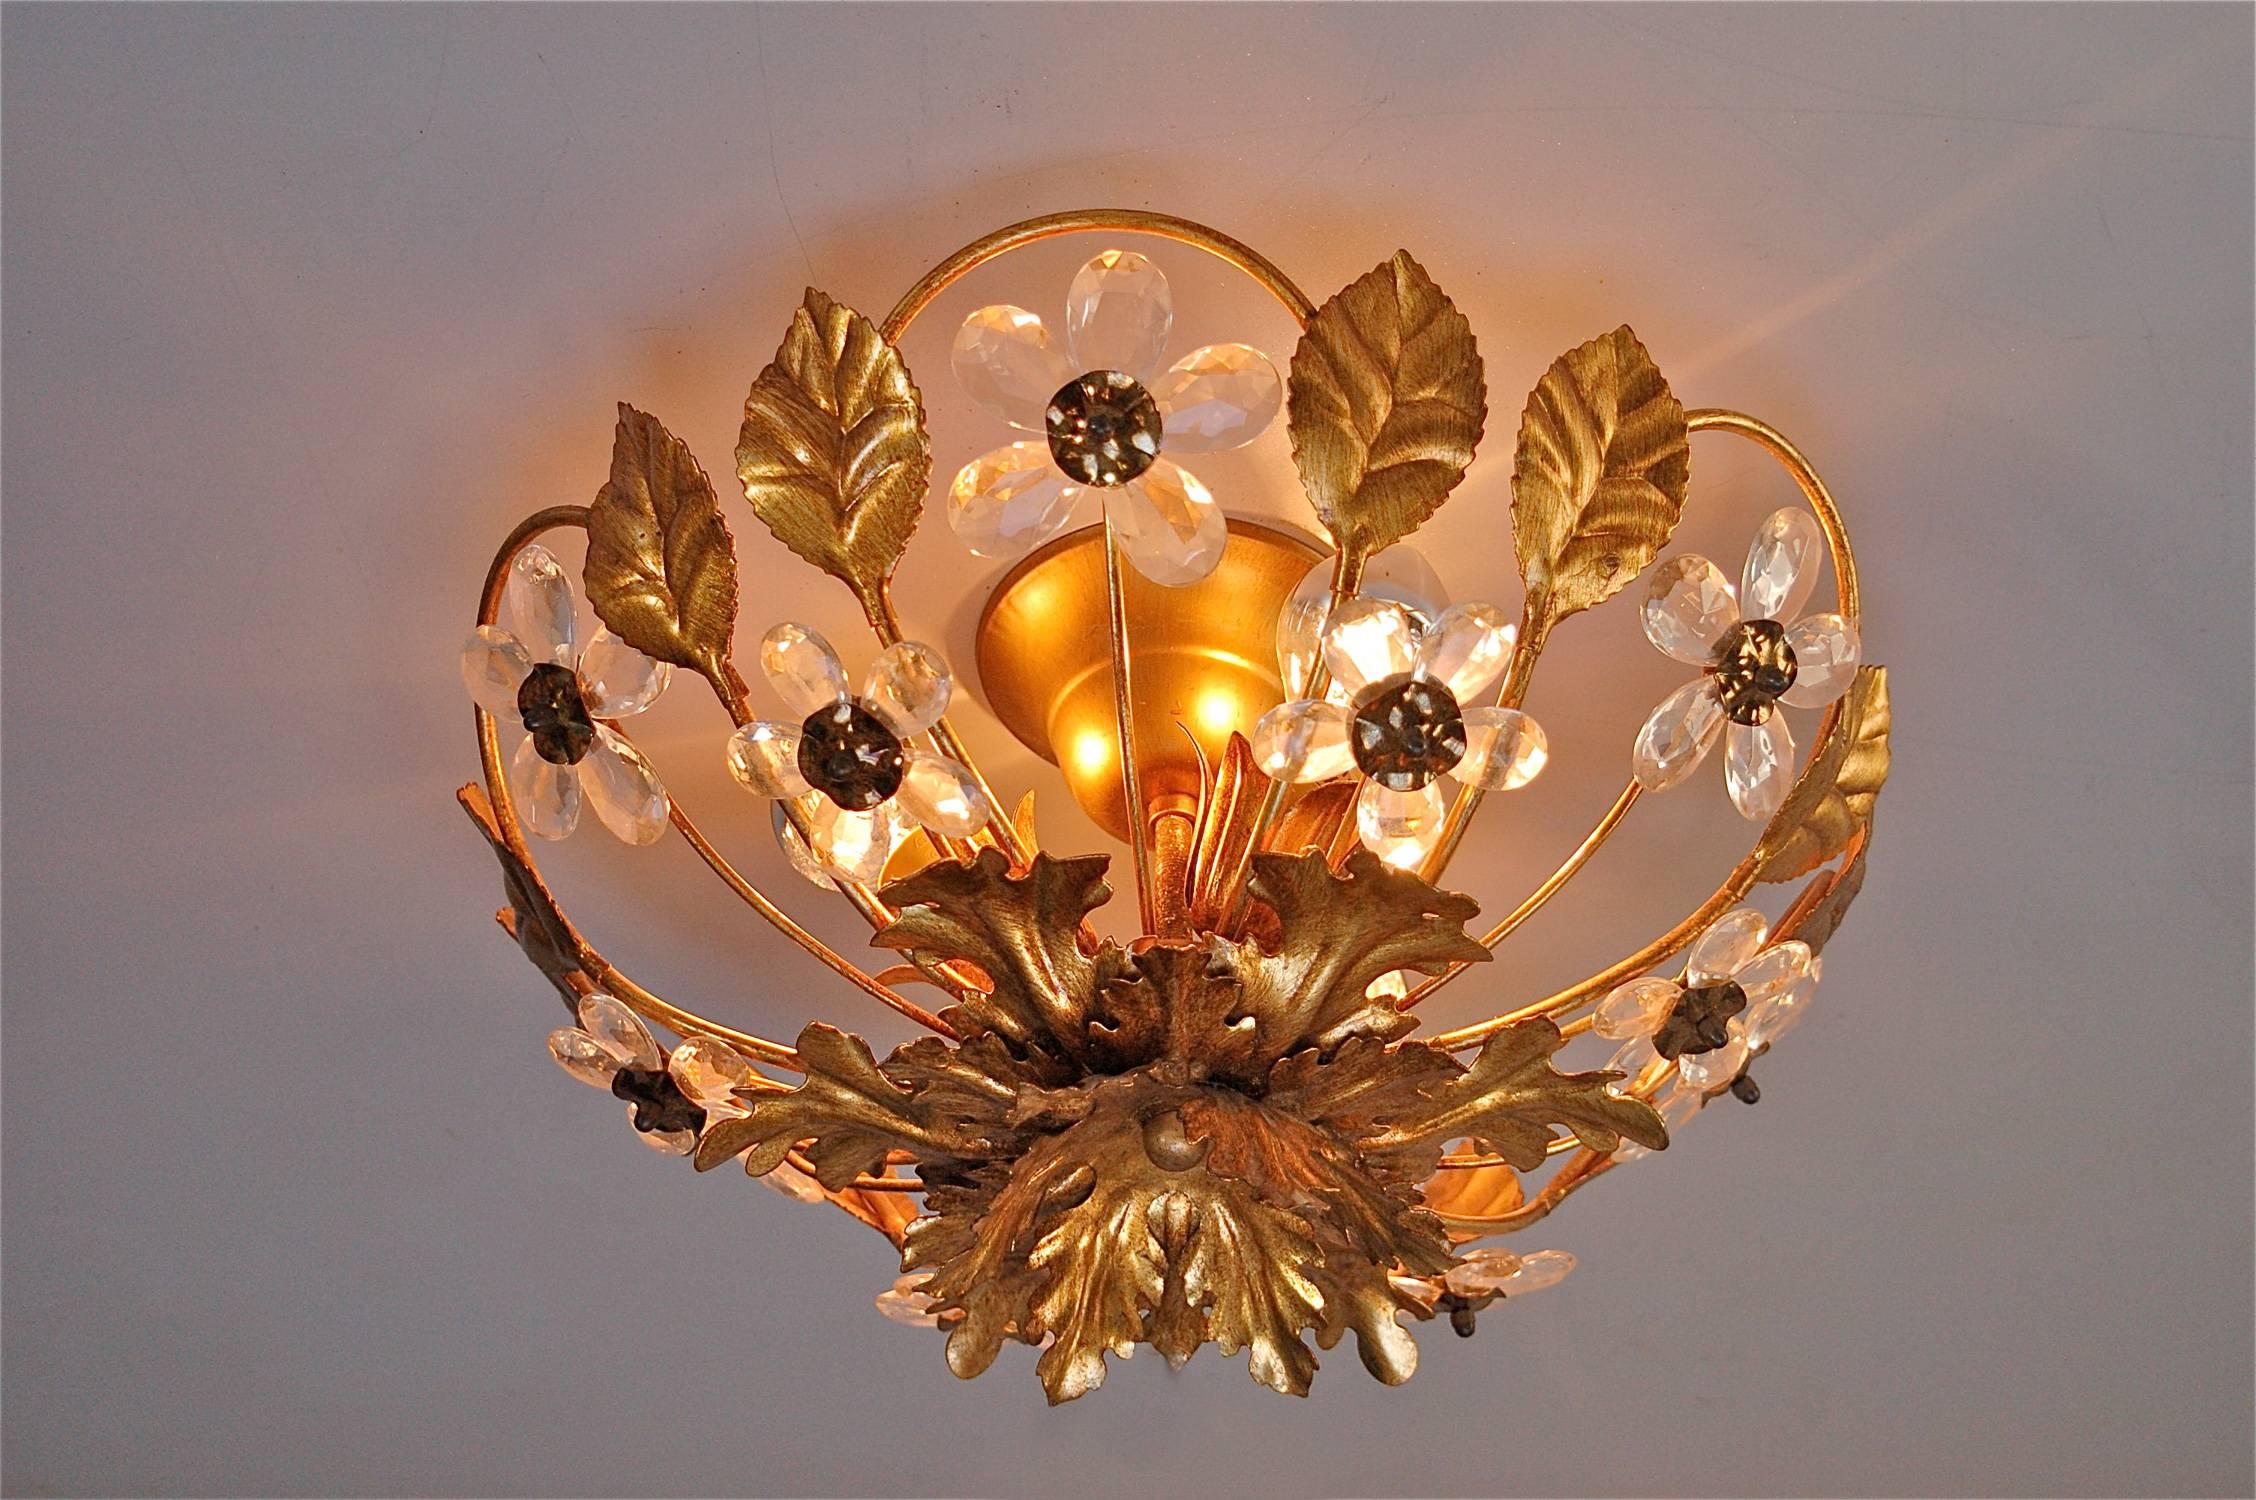 This gold coloured metal floral ceiling light, shaped like a basket, is decorated with hand cut crystal flowers that glisten in the light. Despite it being of the late 20th century, some patina has built up which enhances the warm glow. The light is